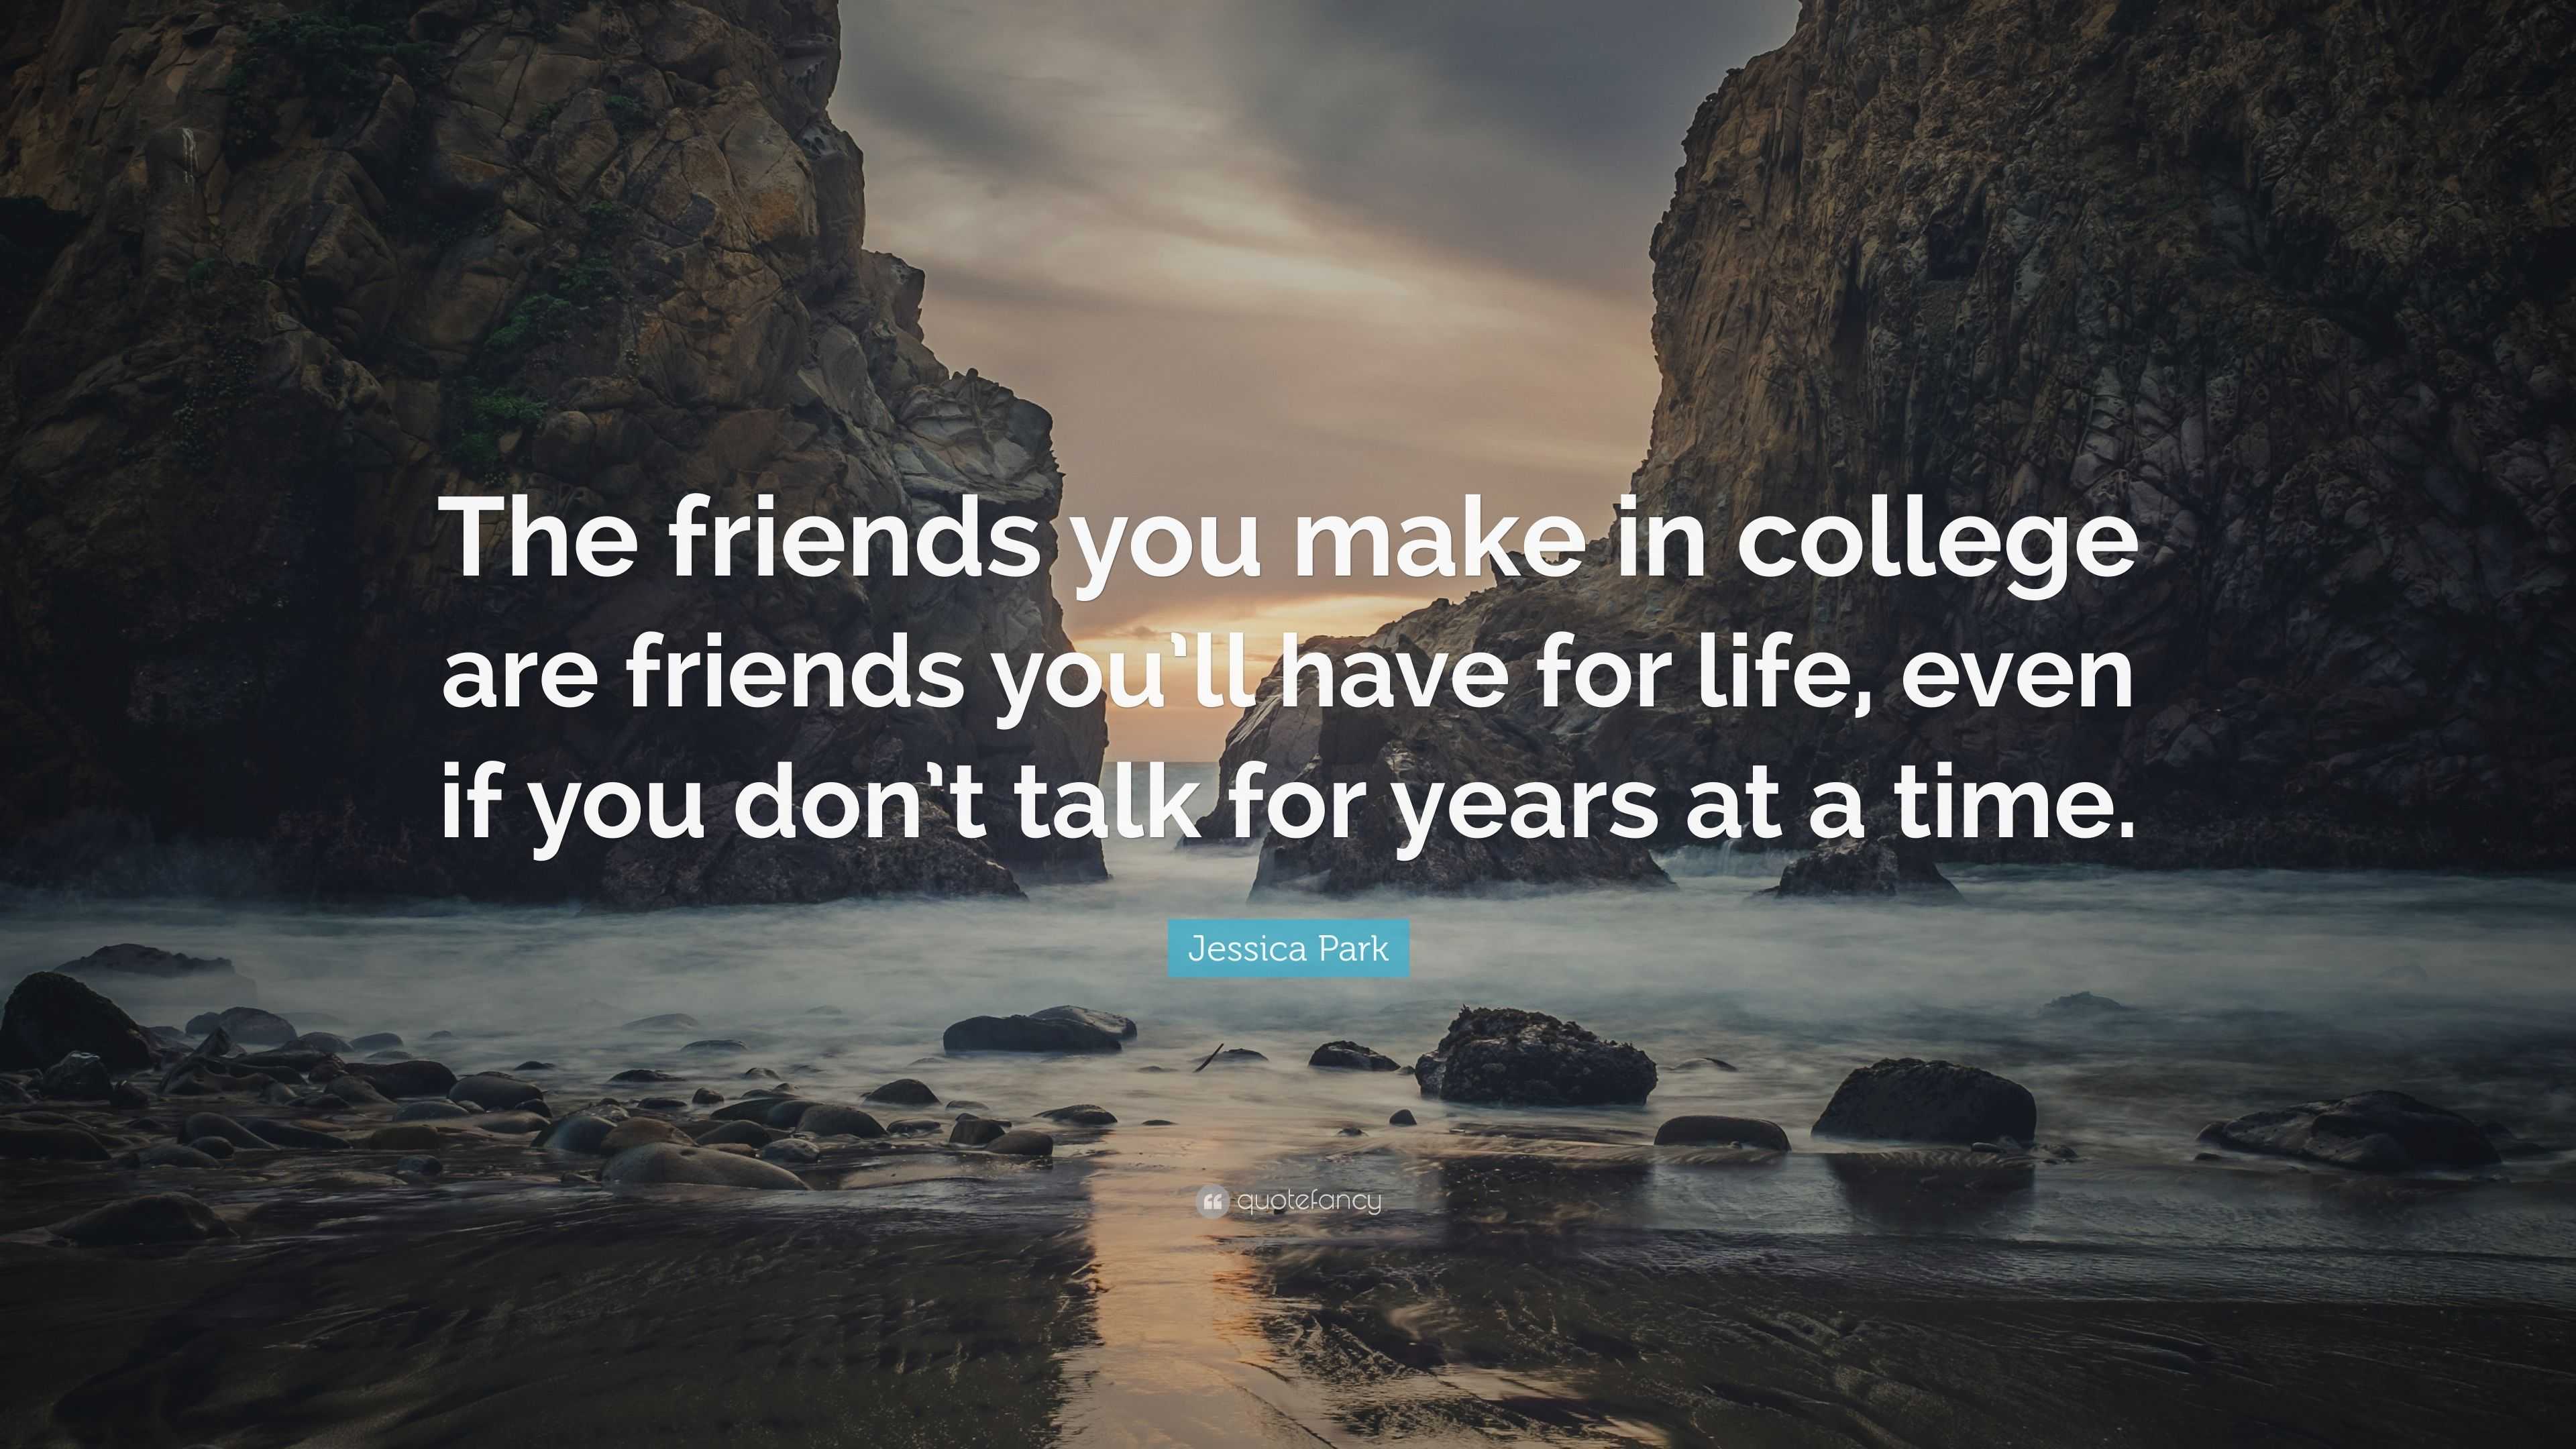 College friends quotes images